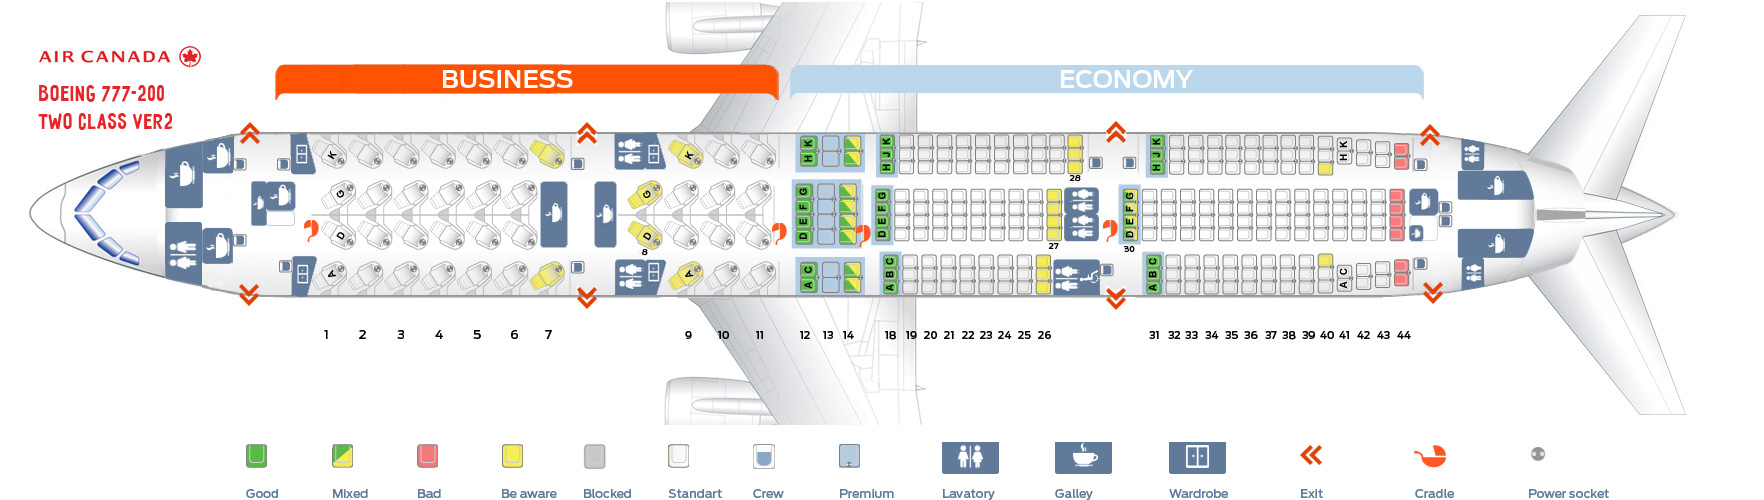 Seat Map Boeing Air Canada Best Seats In Plane